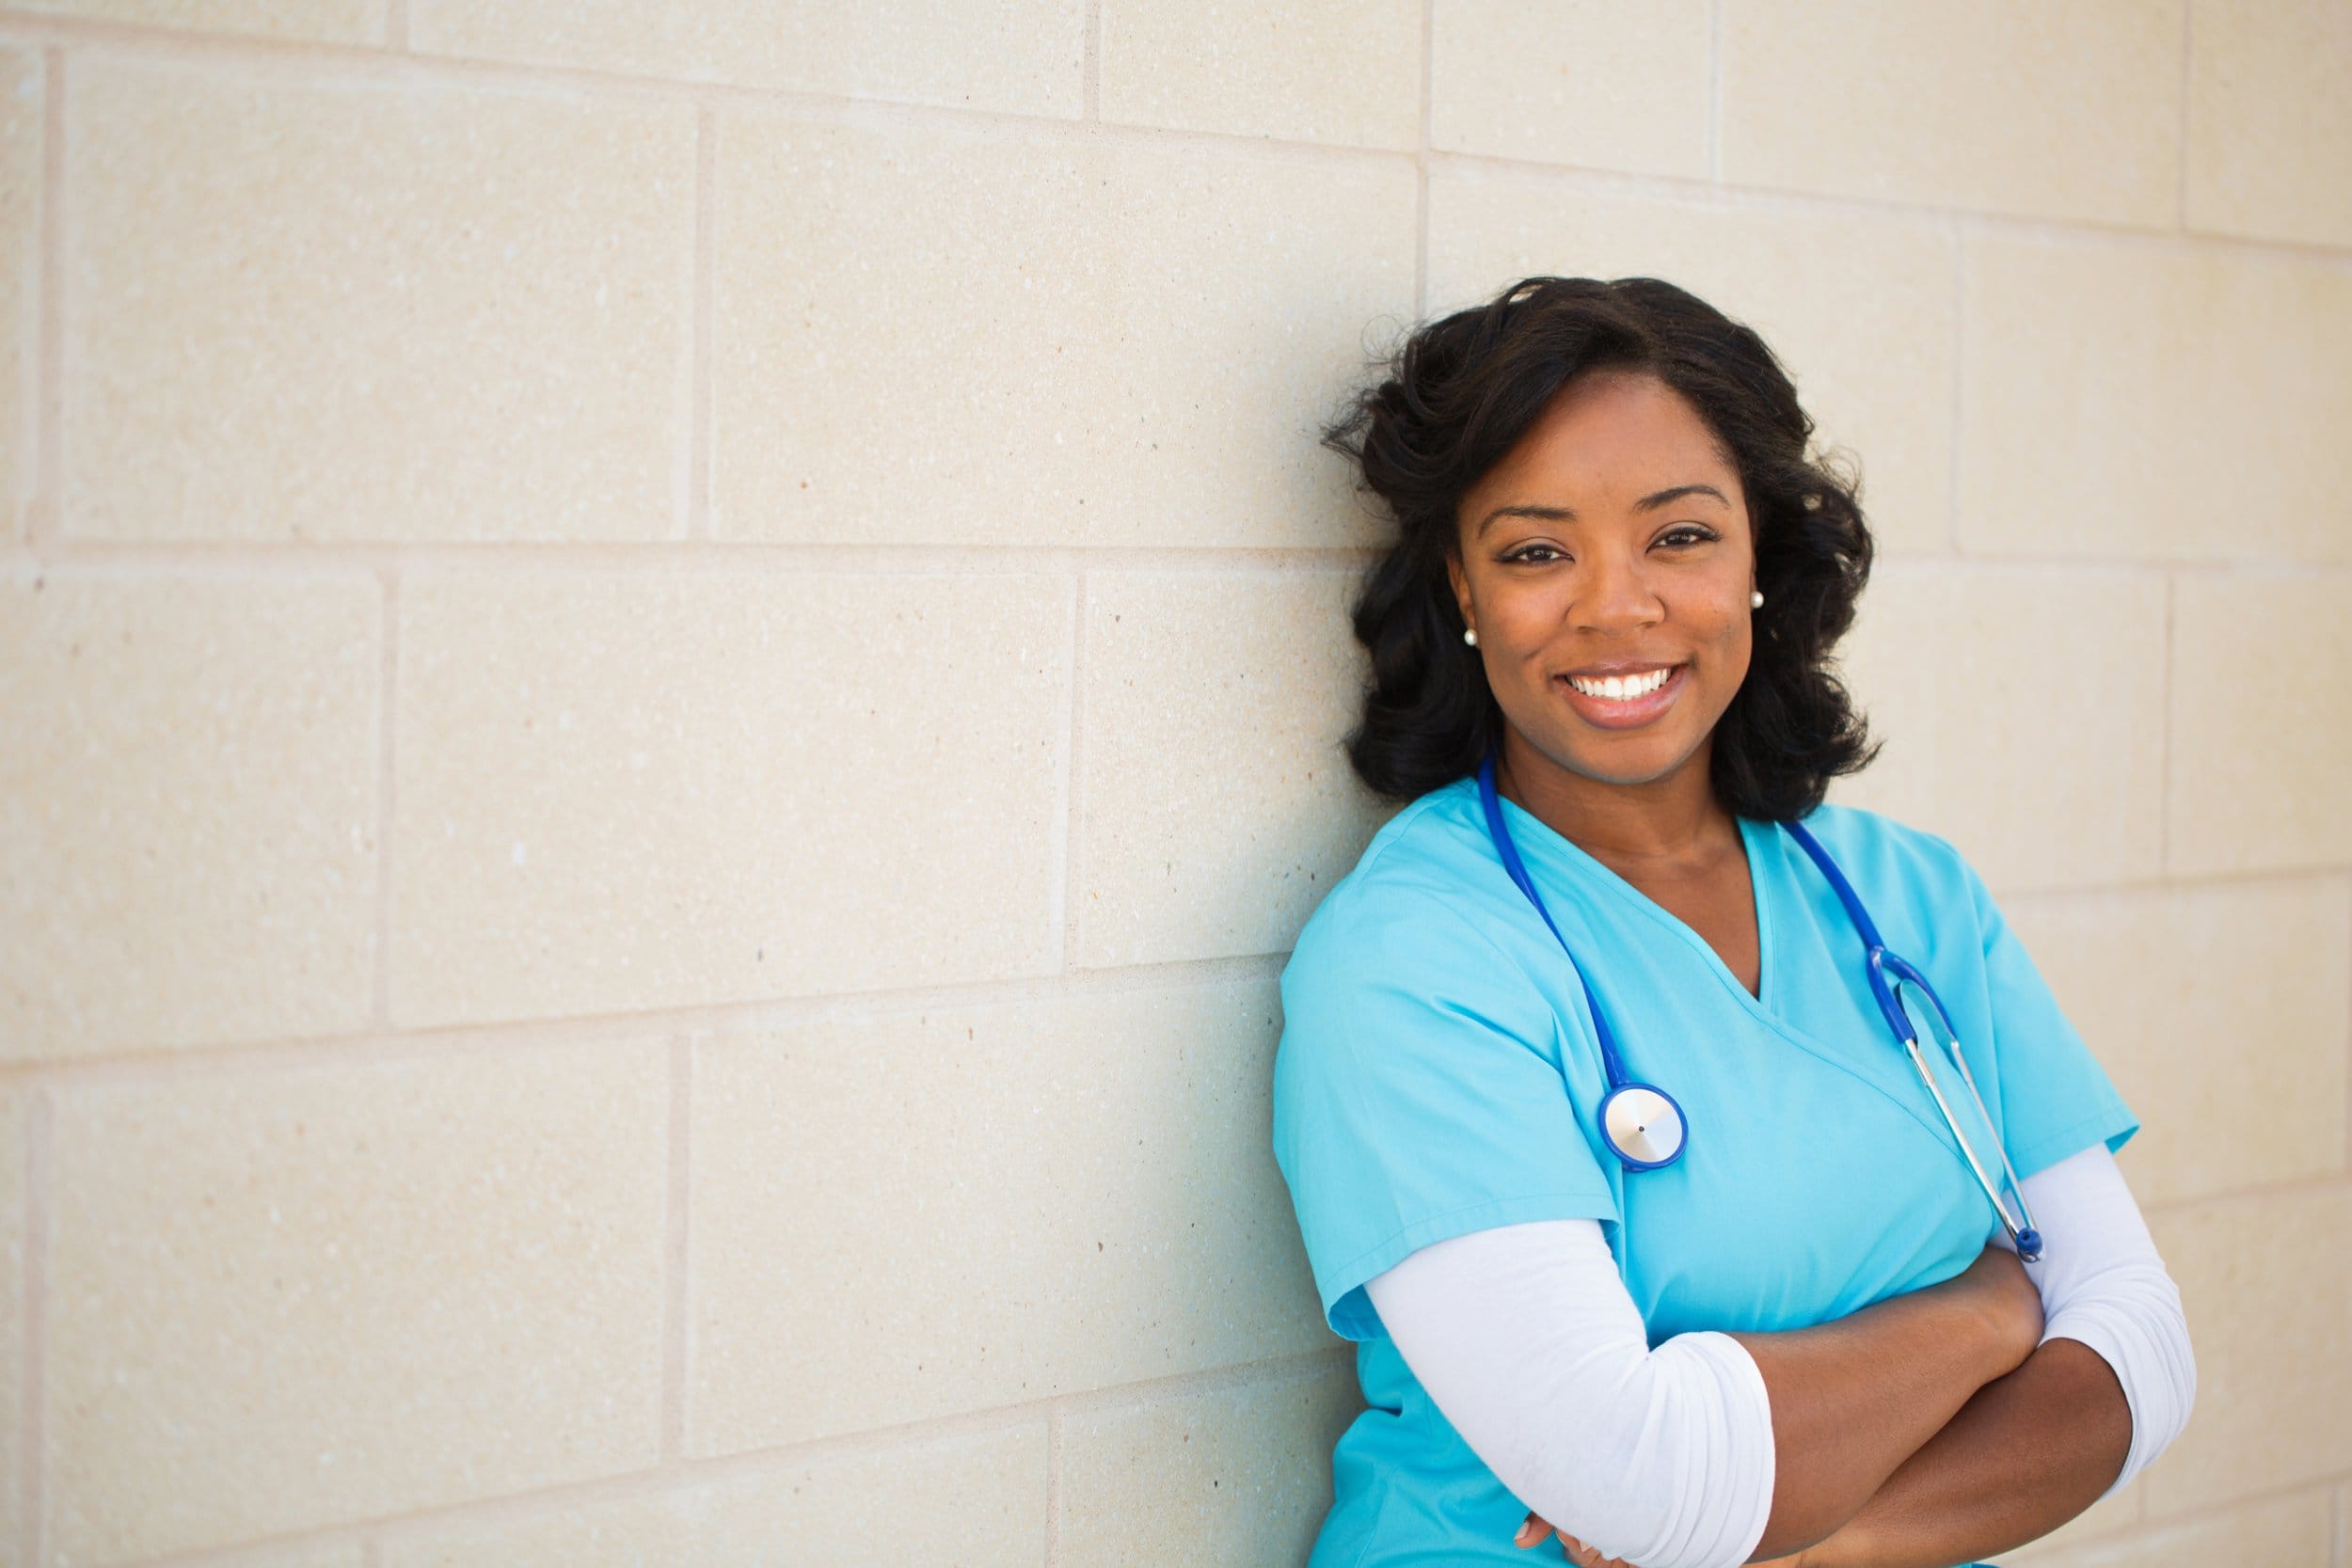 Healthcare worker in uniform standing near white wall